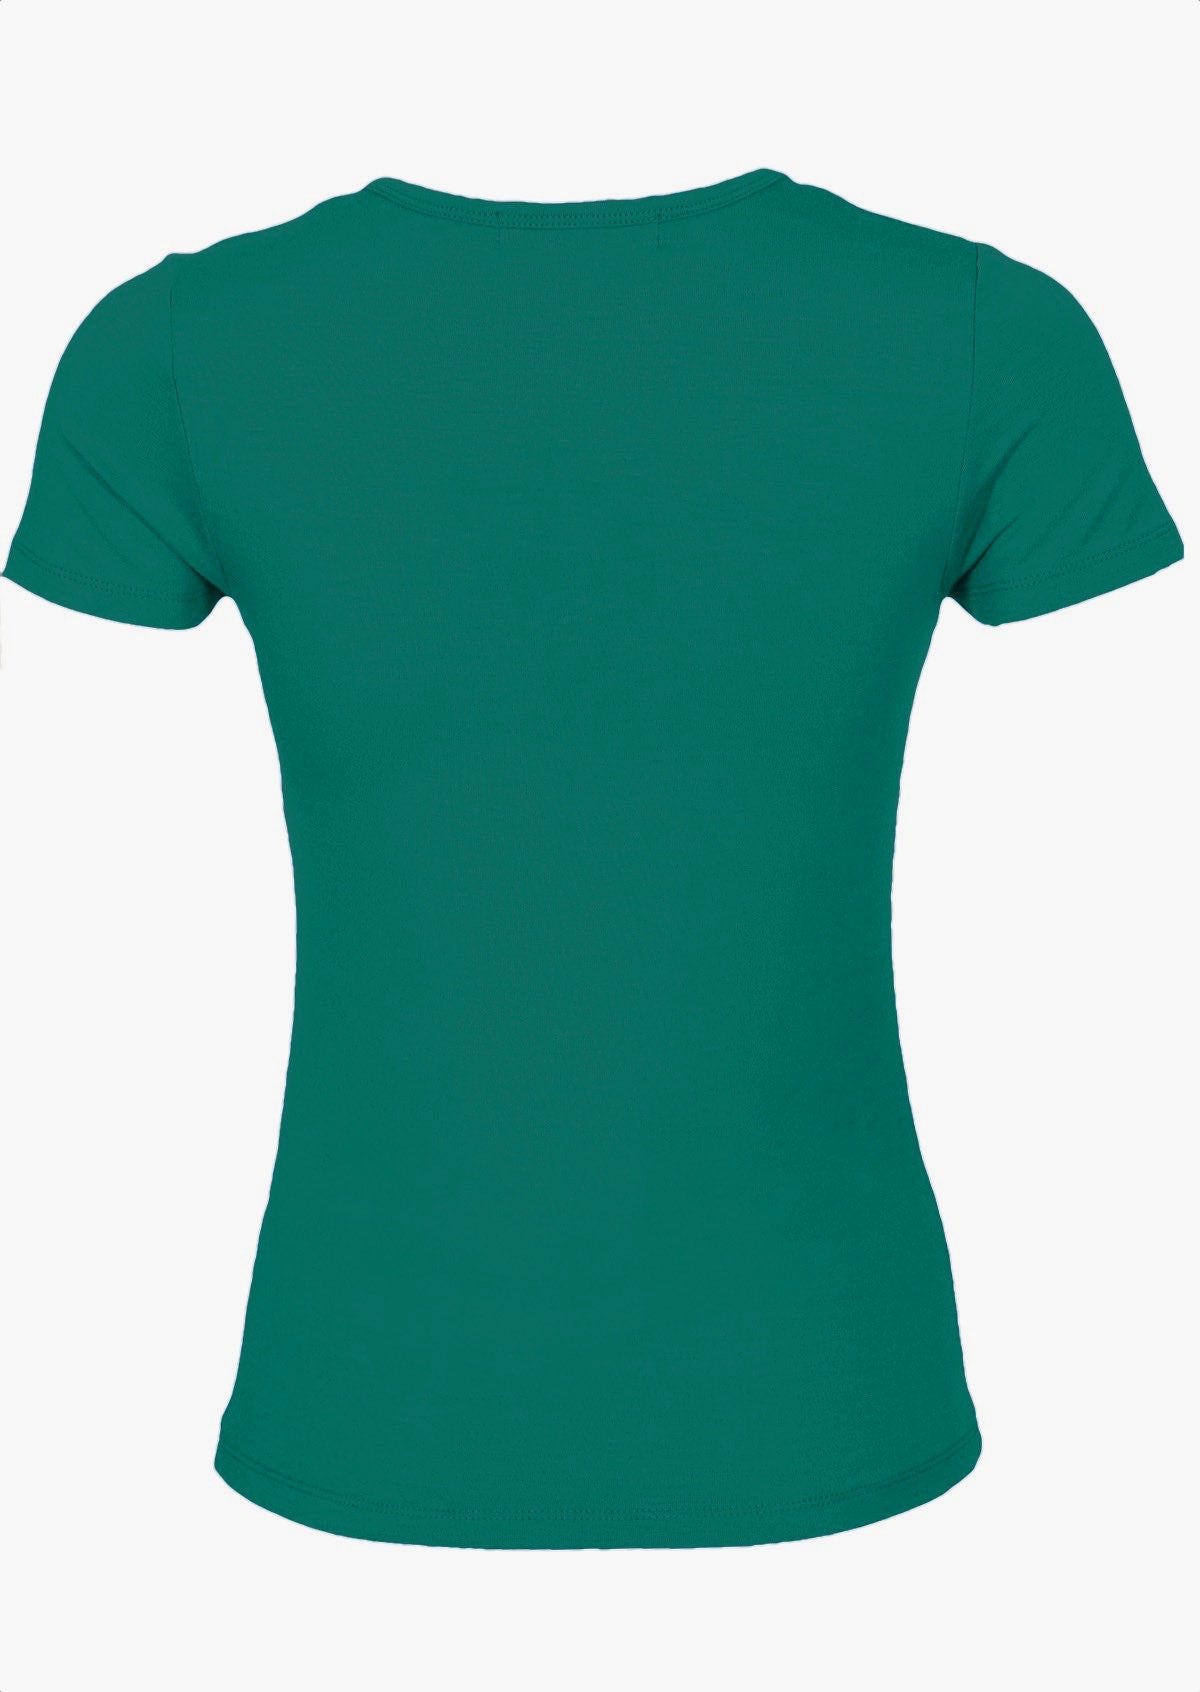 Back view fitted short sleeve green t-shirt.